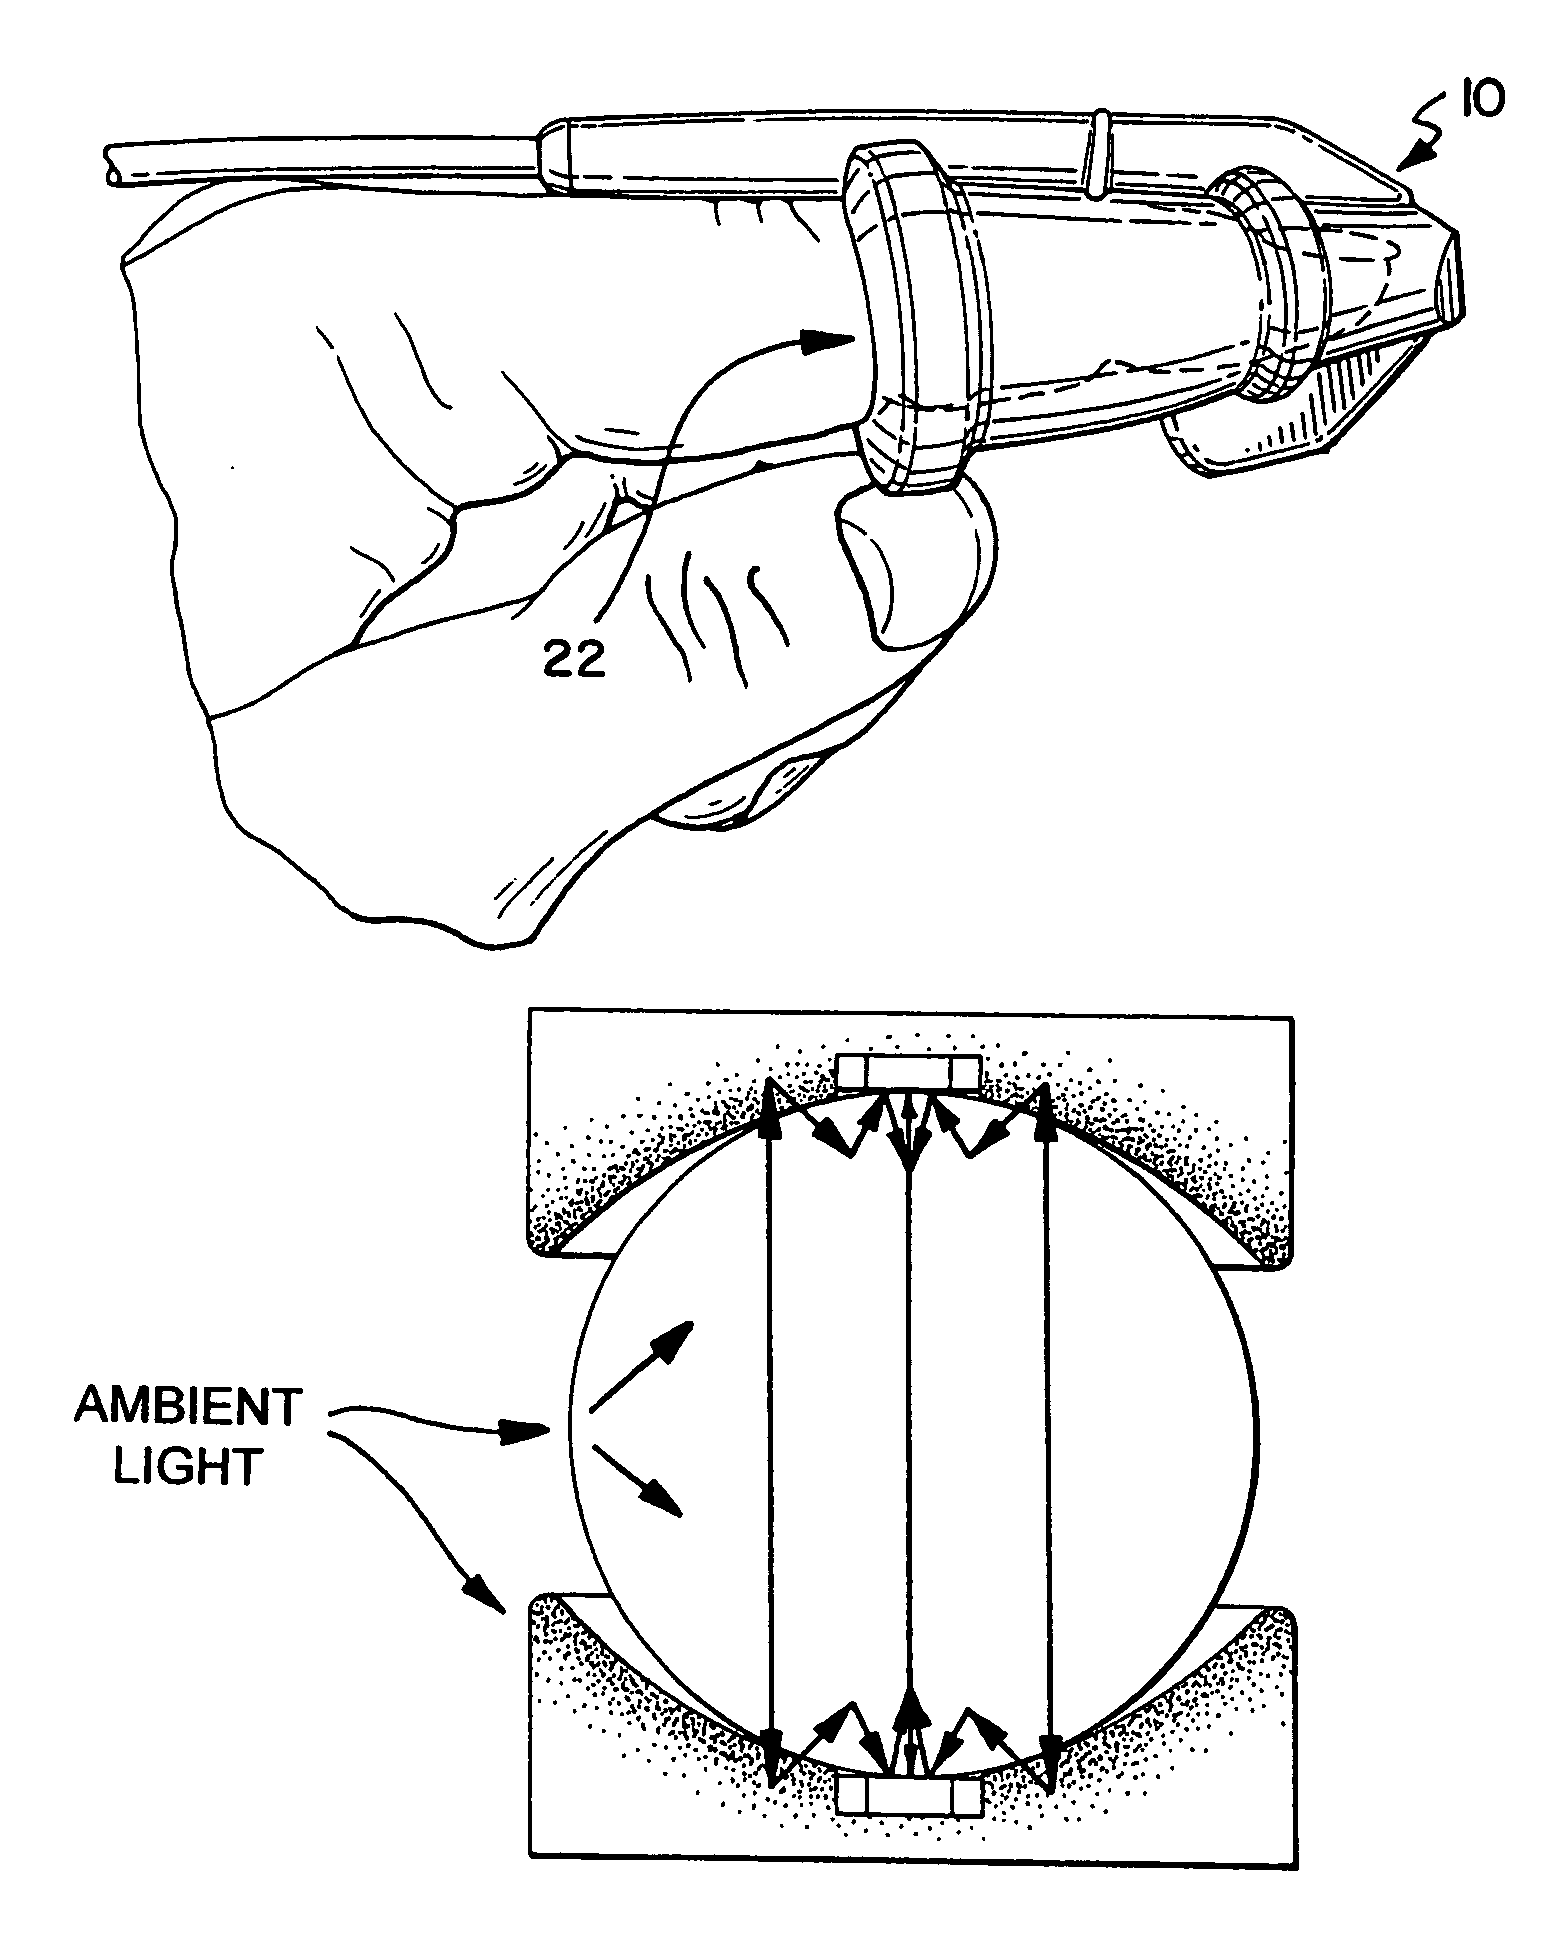 Apparatus for improved pulse oximetry measurement